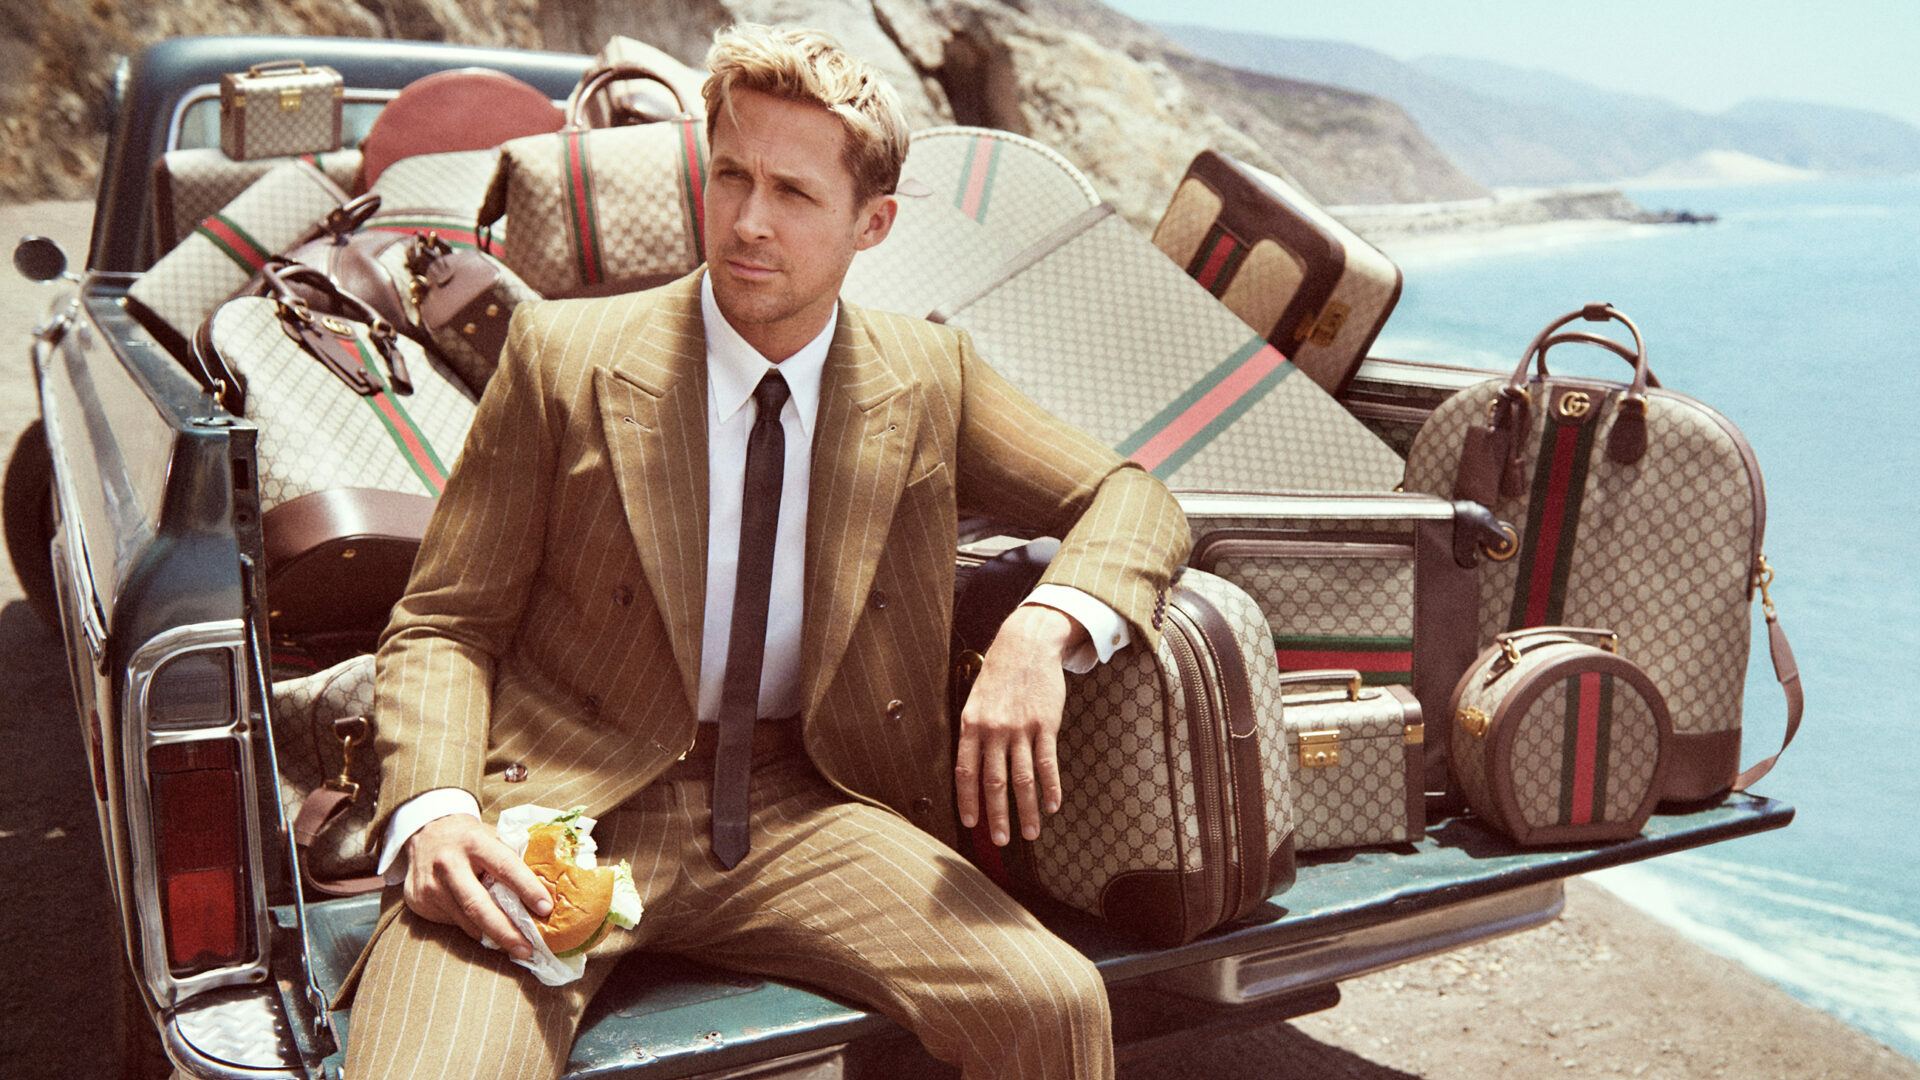 Ryan Gosling stars in Gucci’s new Valigeria bag campaign - Rolling Stone UK